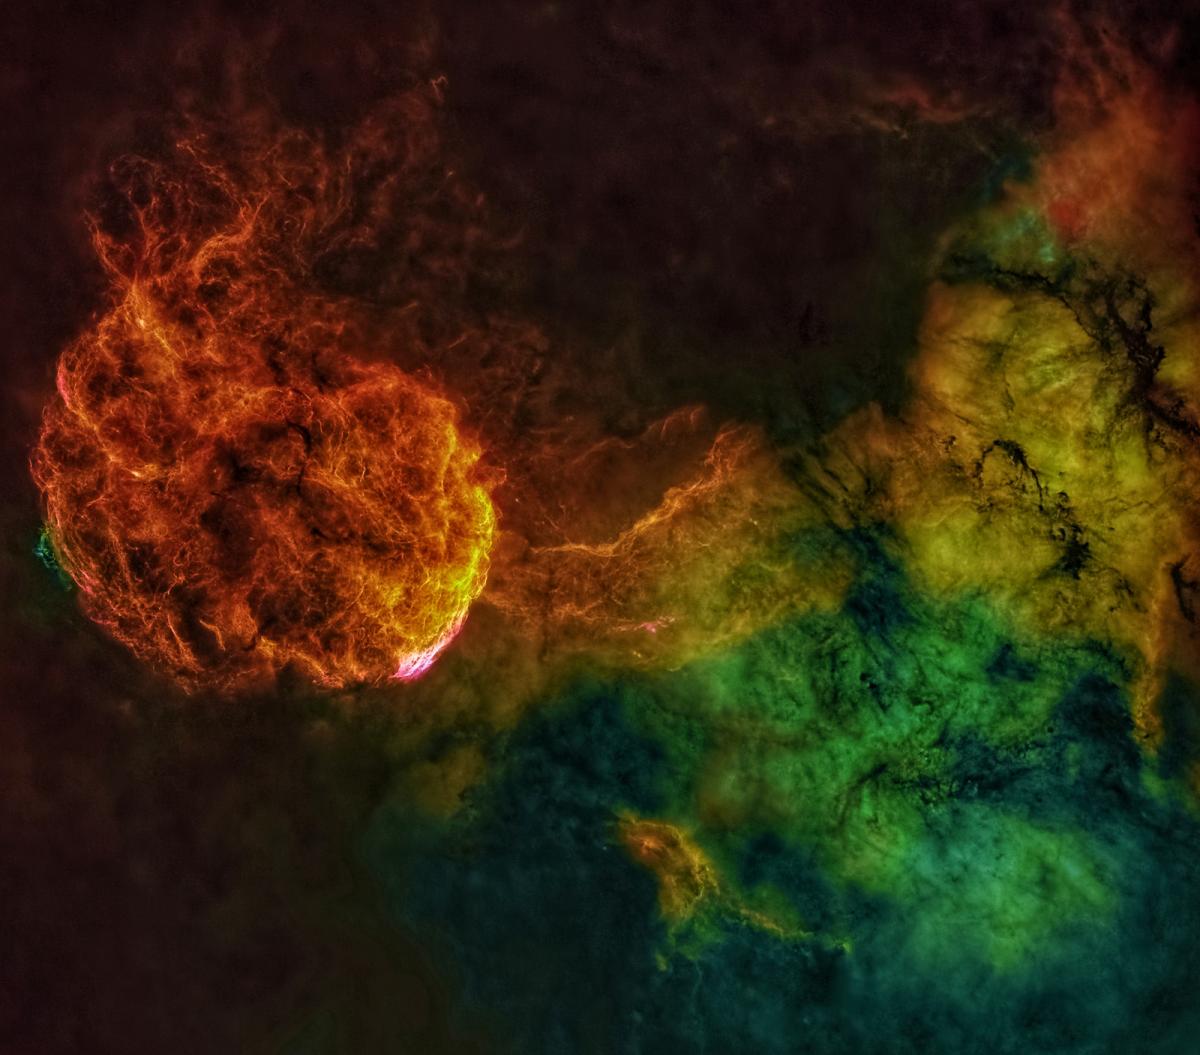 A vividly colored swirl of gasses and plasma concentrate on a near-spherical nebula cloud that resembles a jellyfish.